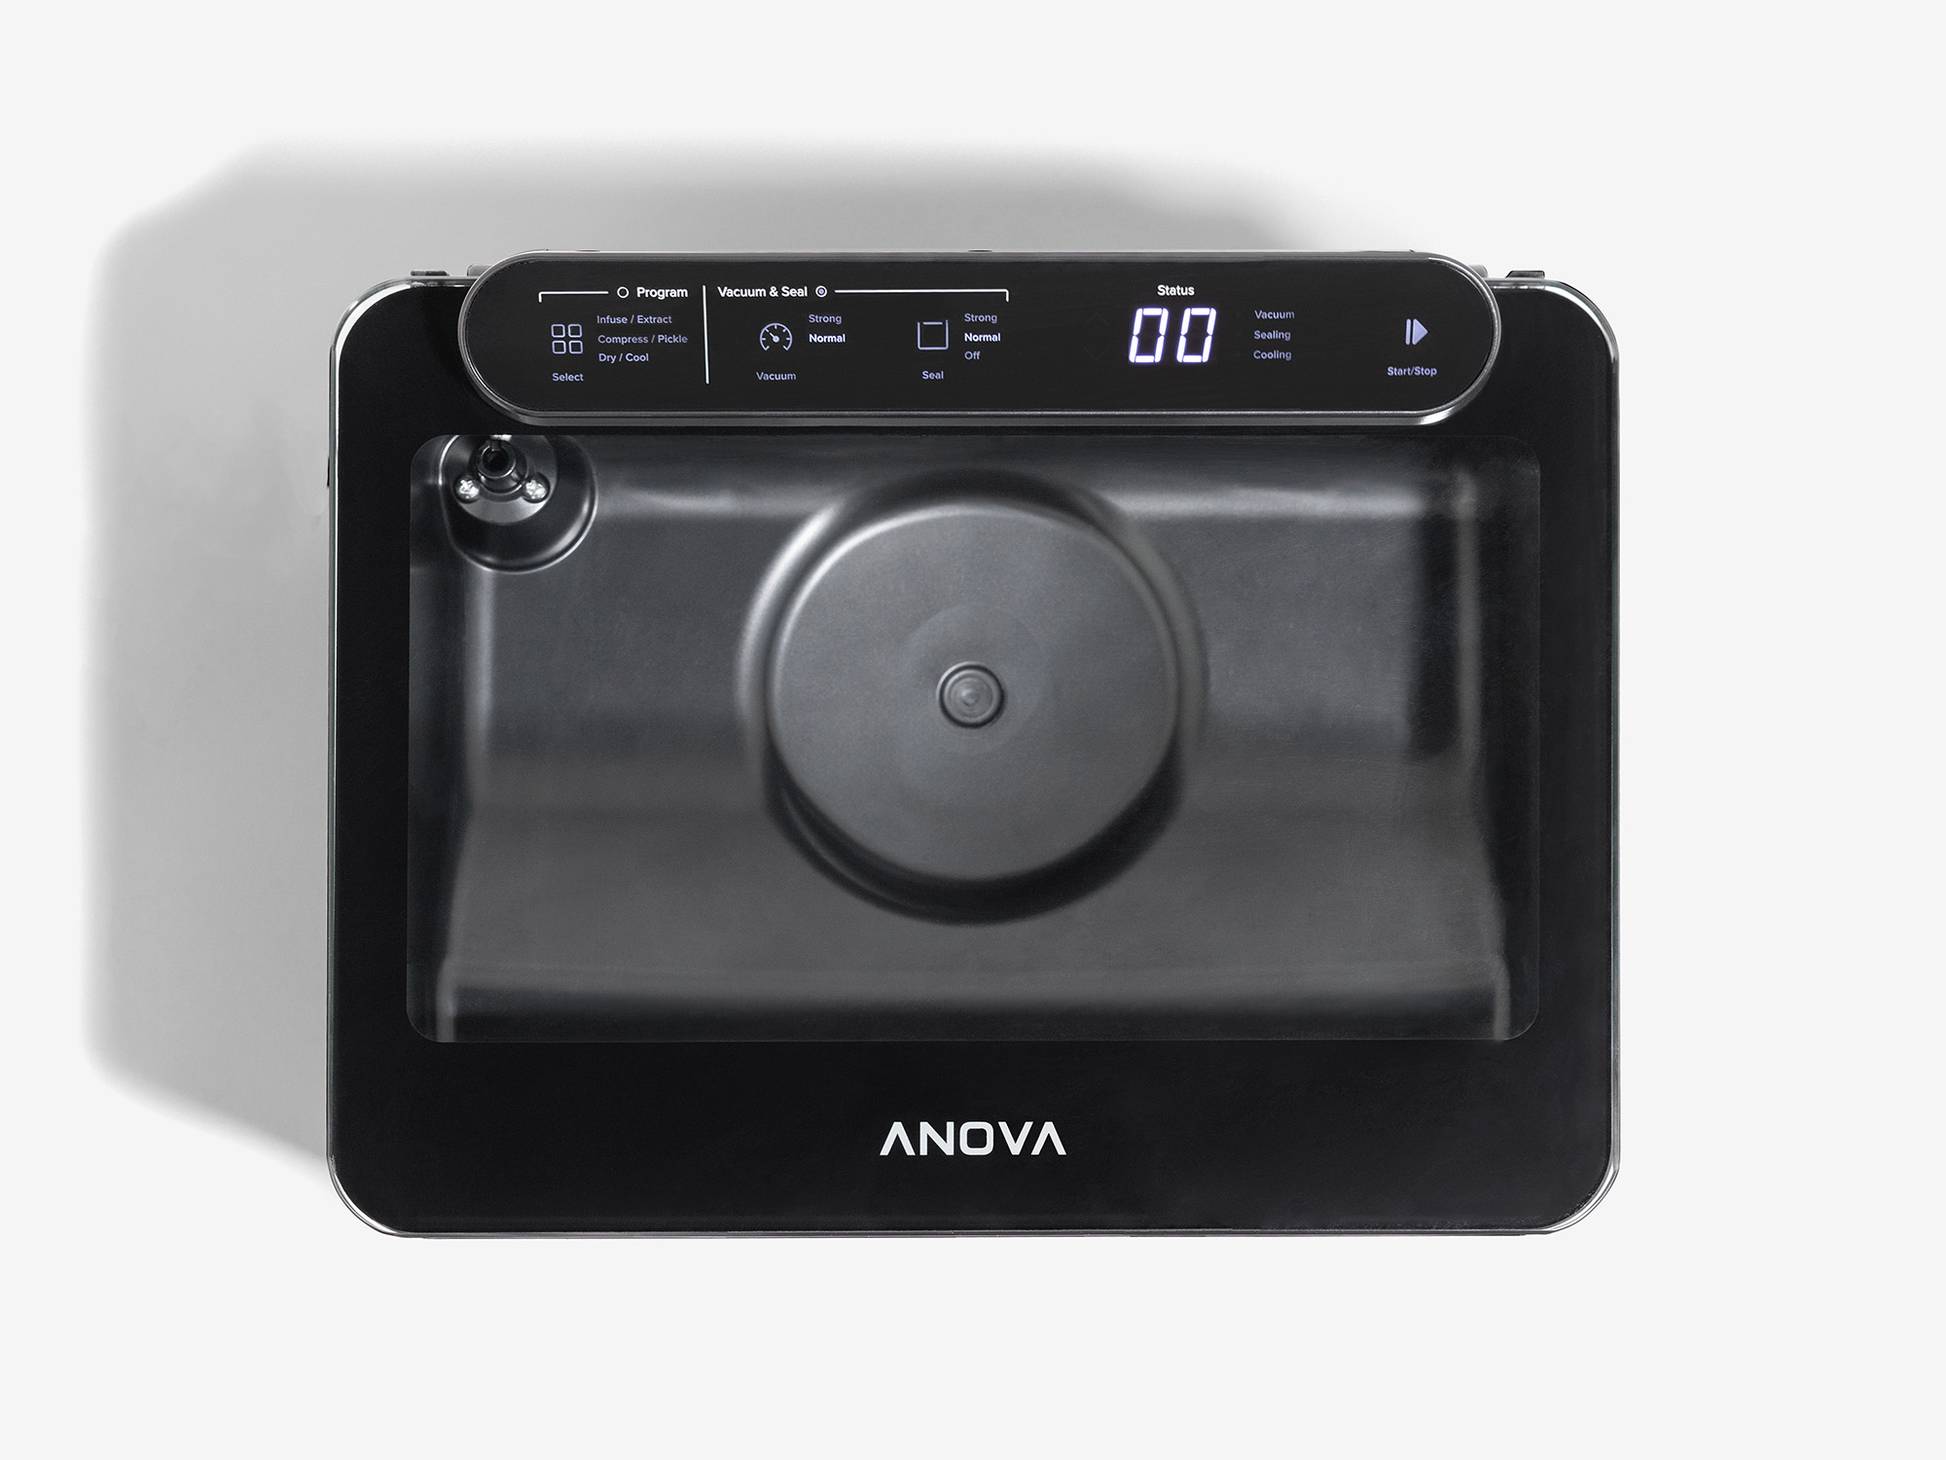 The Anova Precision Chamber Vacuum Sealer: Unboxing And Pickle Recipe 